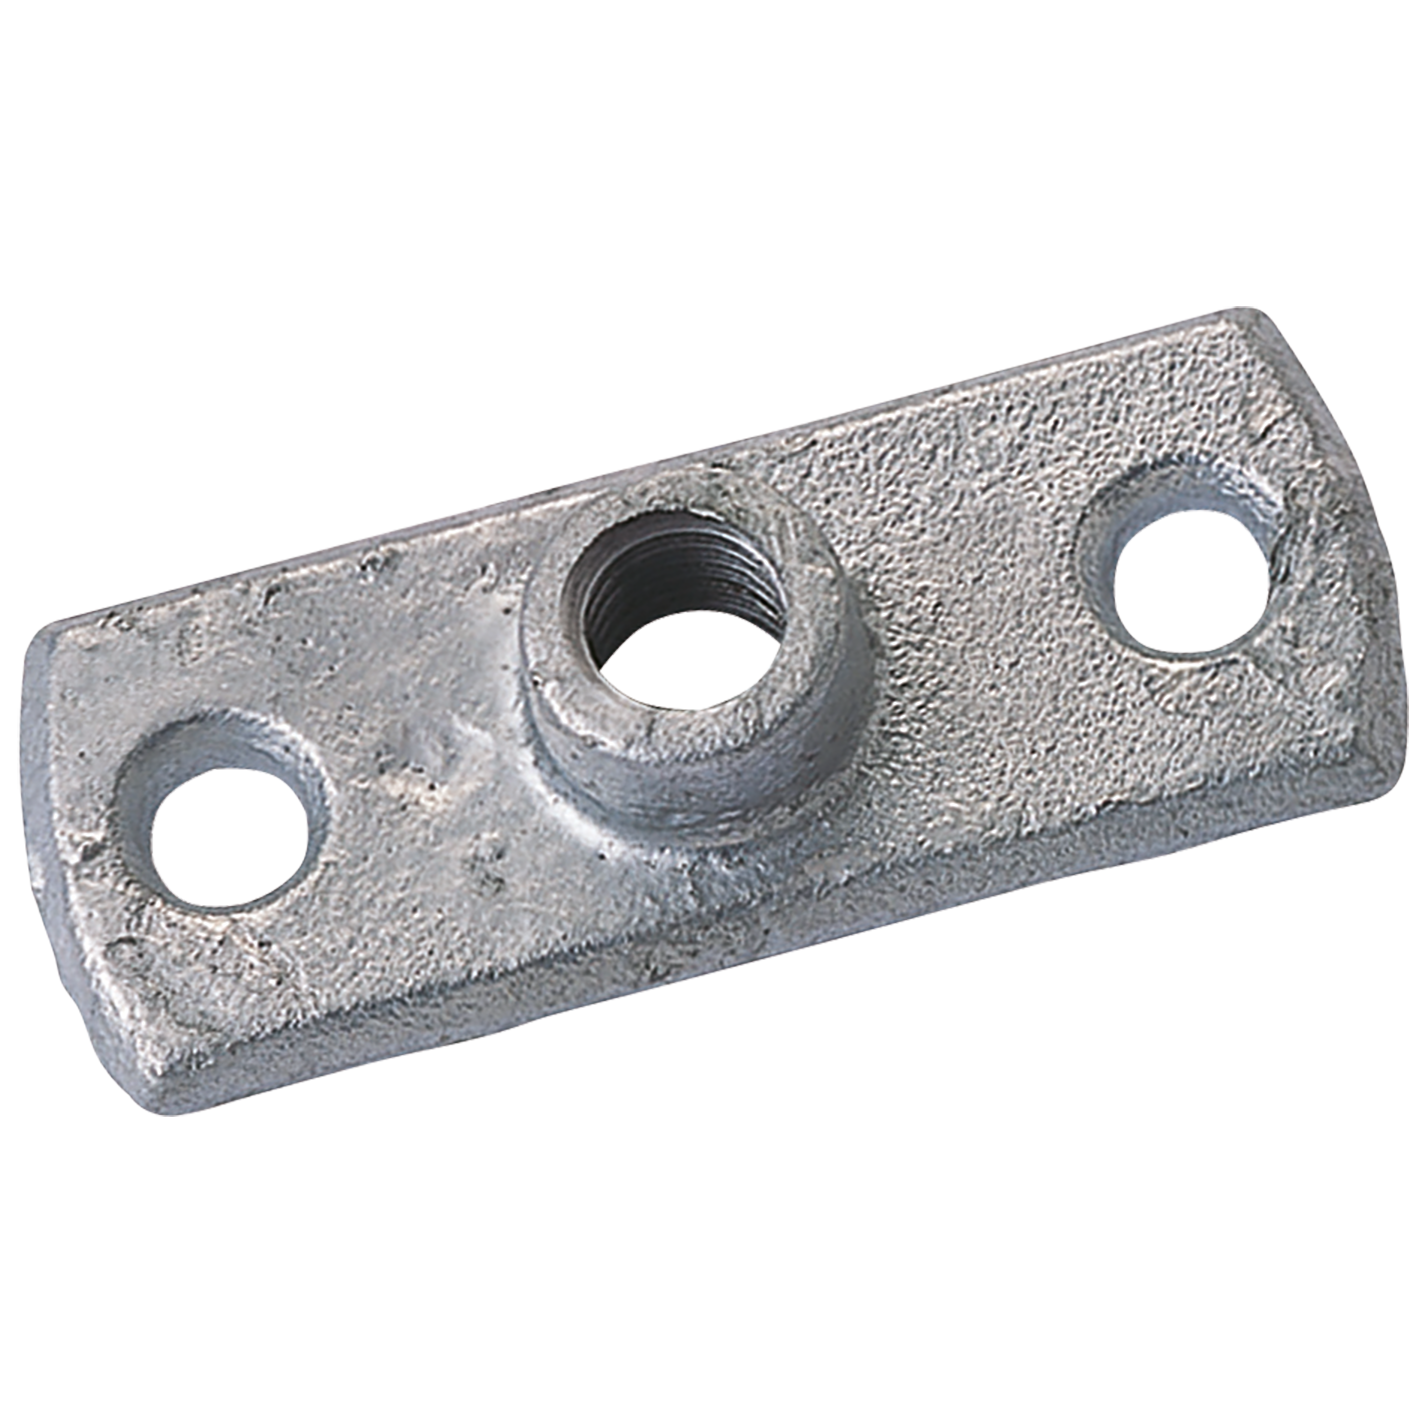 M12METRIC TAPPED BACKPLATE FIG515 GALVANISED